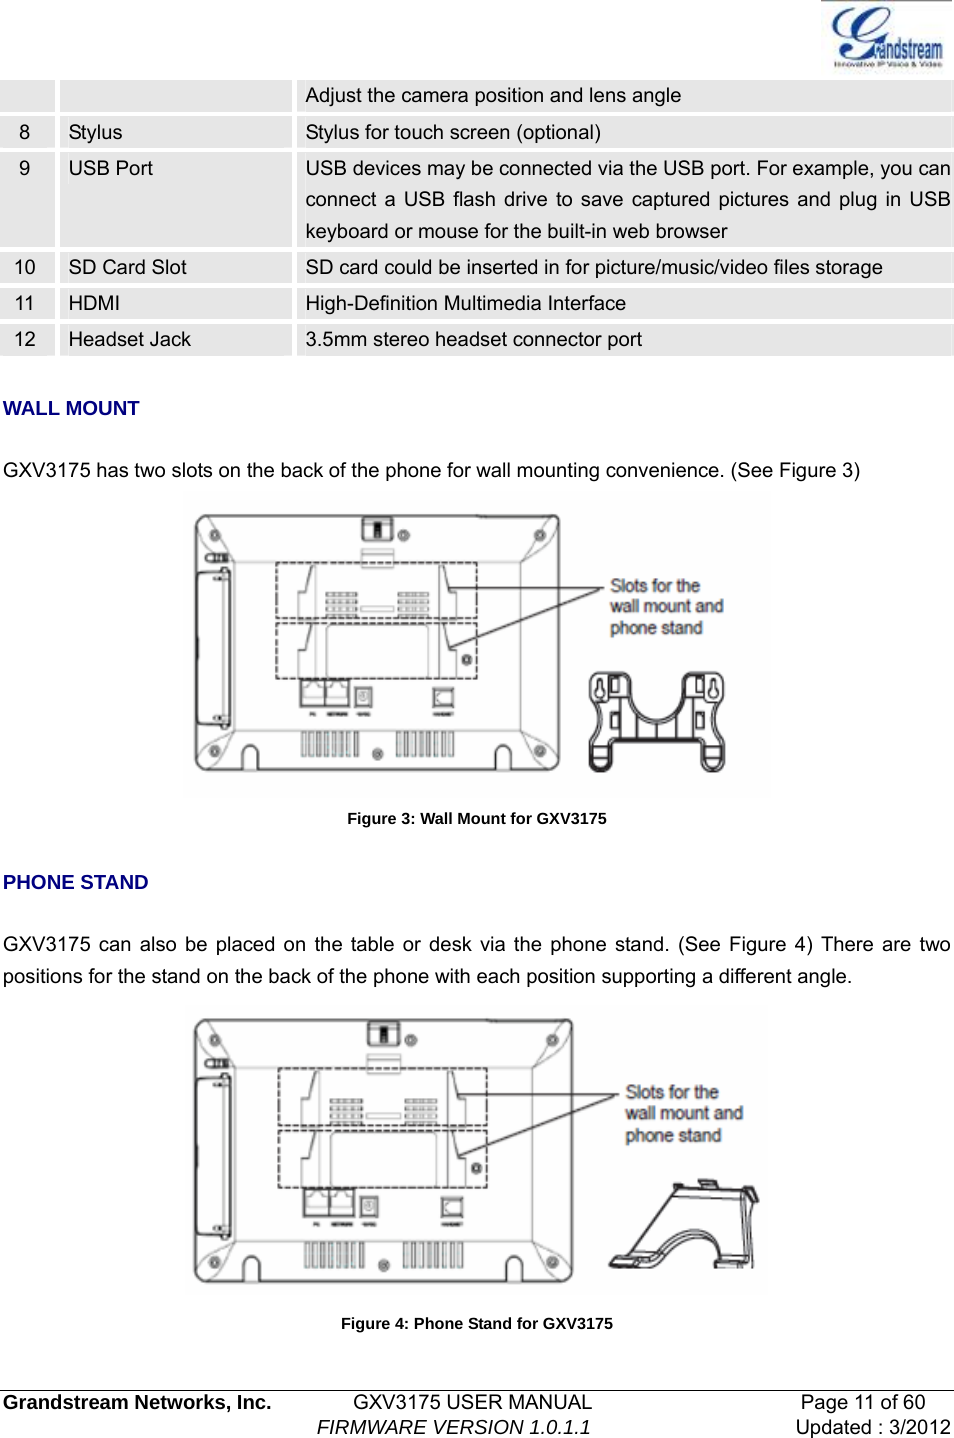   Grandstream Networks, Inc.        GXV3175 USER MANUAL                     Page 11 of 60                                FIRMWARE VERSION 1.0.1.1 Updated : 3/2012  Adjust the camera position and lens angle 8  Stylus  Stylus for touch screen (optional) 9  USB Port  USB devices may be connected via the USB port. For example, you can connect a USB flash drive to save captured pictures and plug in USB keyboard or mouse for the built-in web browser 10  SD Card Slot  SD card could be inserted in for picture/music/video files storage 11  HDMI  High-Definition Multimedia Interface 12  Headset Jack  3.5mm stereo headset connector port  WALL MOUNT  GXV3175 has two slots on the back of the phone for wall mounting convenience. (See Figure 3)  Figure 3: Wall Mount for GXV3175  PHONE STAND  GXV3175 can also be placed on the table or desk via the phone stand. (See Figure 4) There are two positions for the stand on the back of the phone with each position supporting a different angle.    Figure 4: Phone Stand for GXV3175 